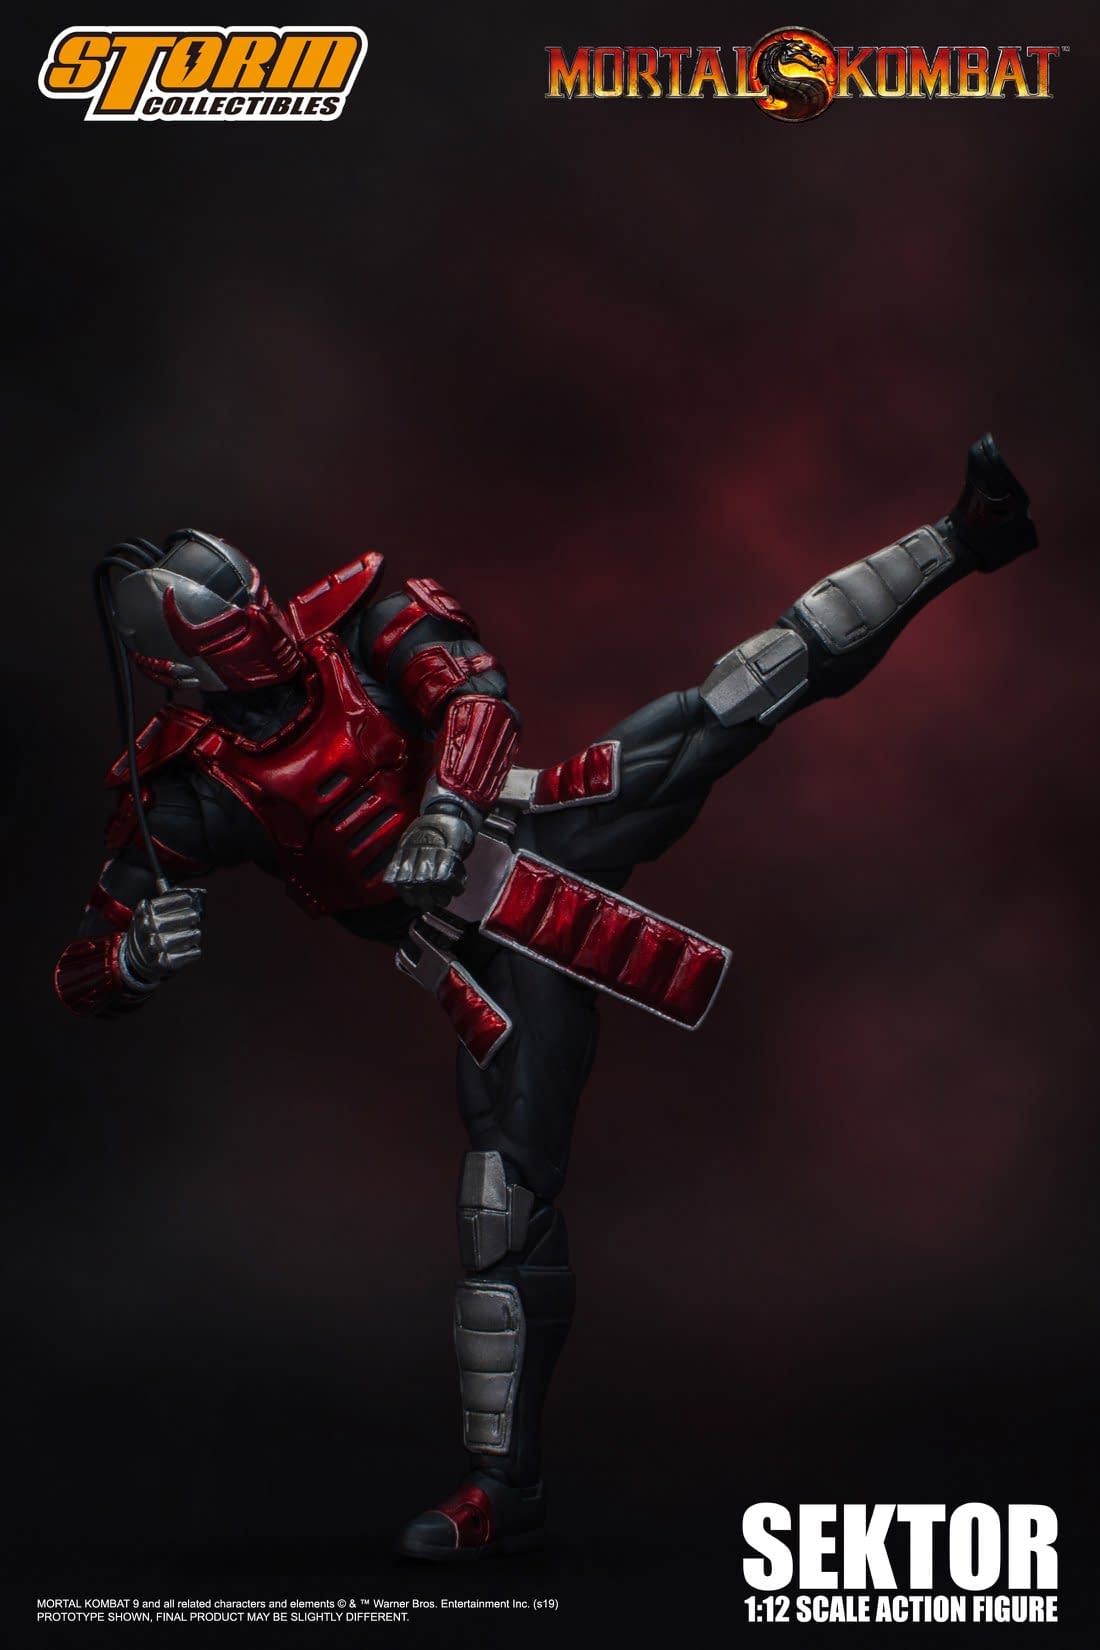 Sektor Enters the "Mortal Kombat" from Storm Collectibles